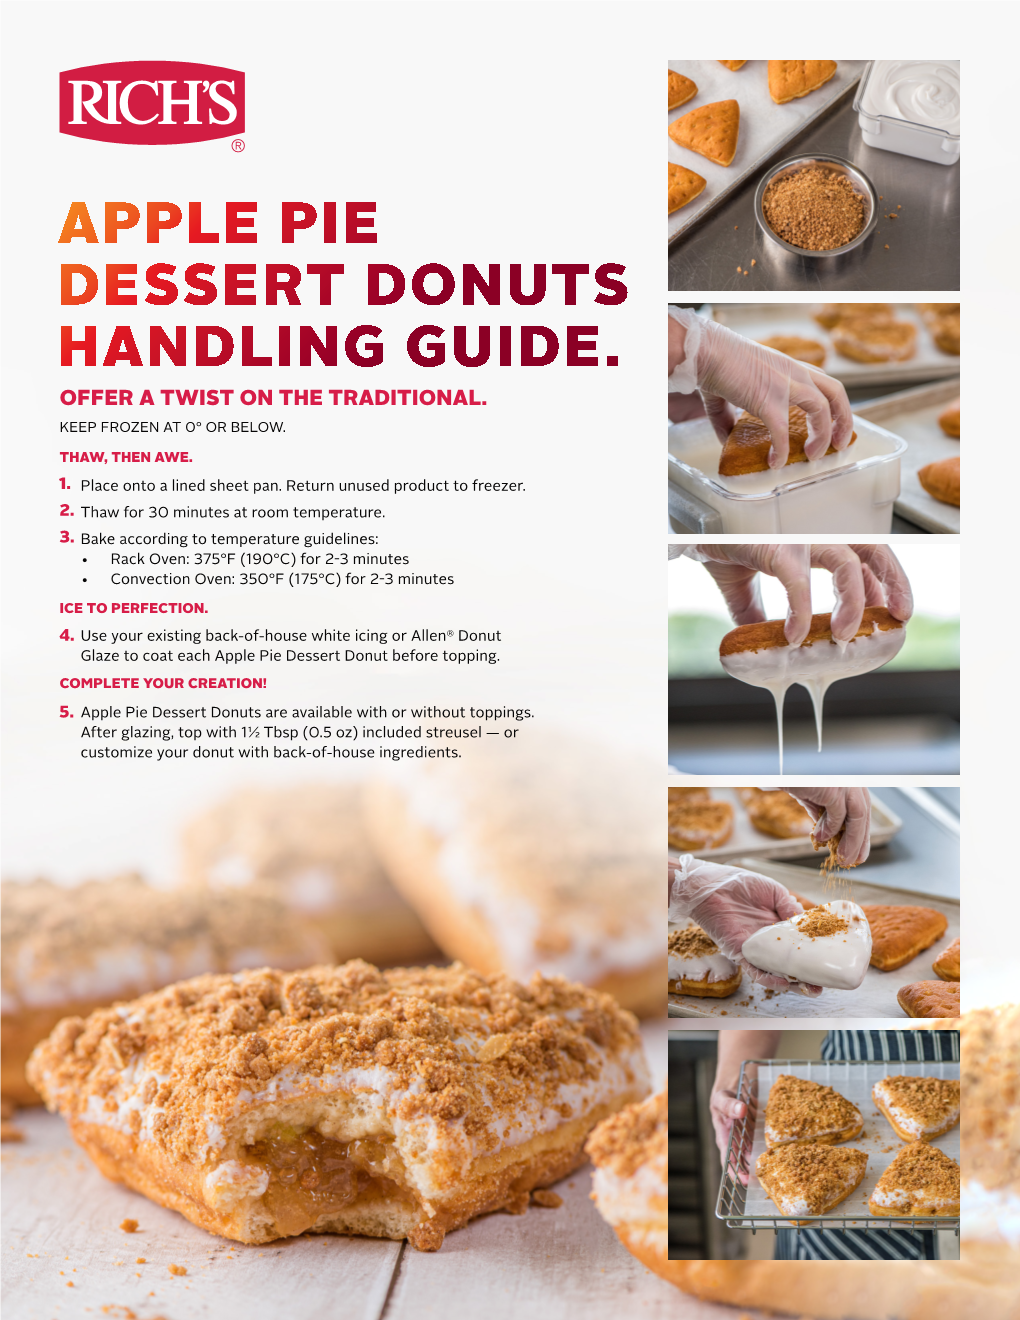 Apple Pie Dessert Donuts Handling Guide. Offer a Twist on the Traditional